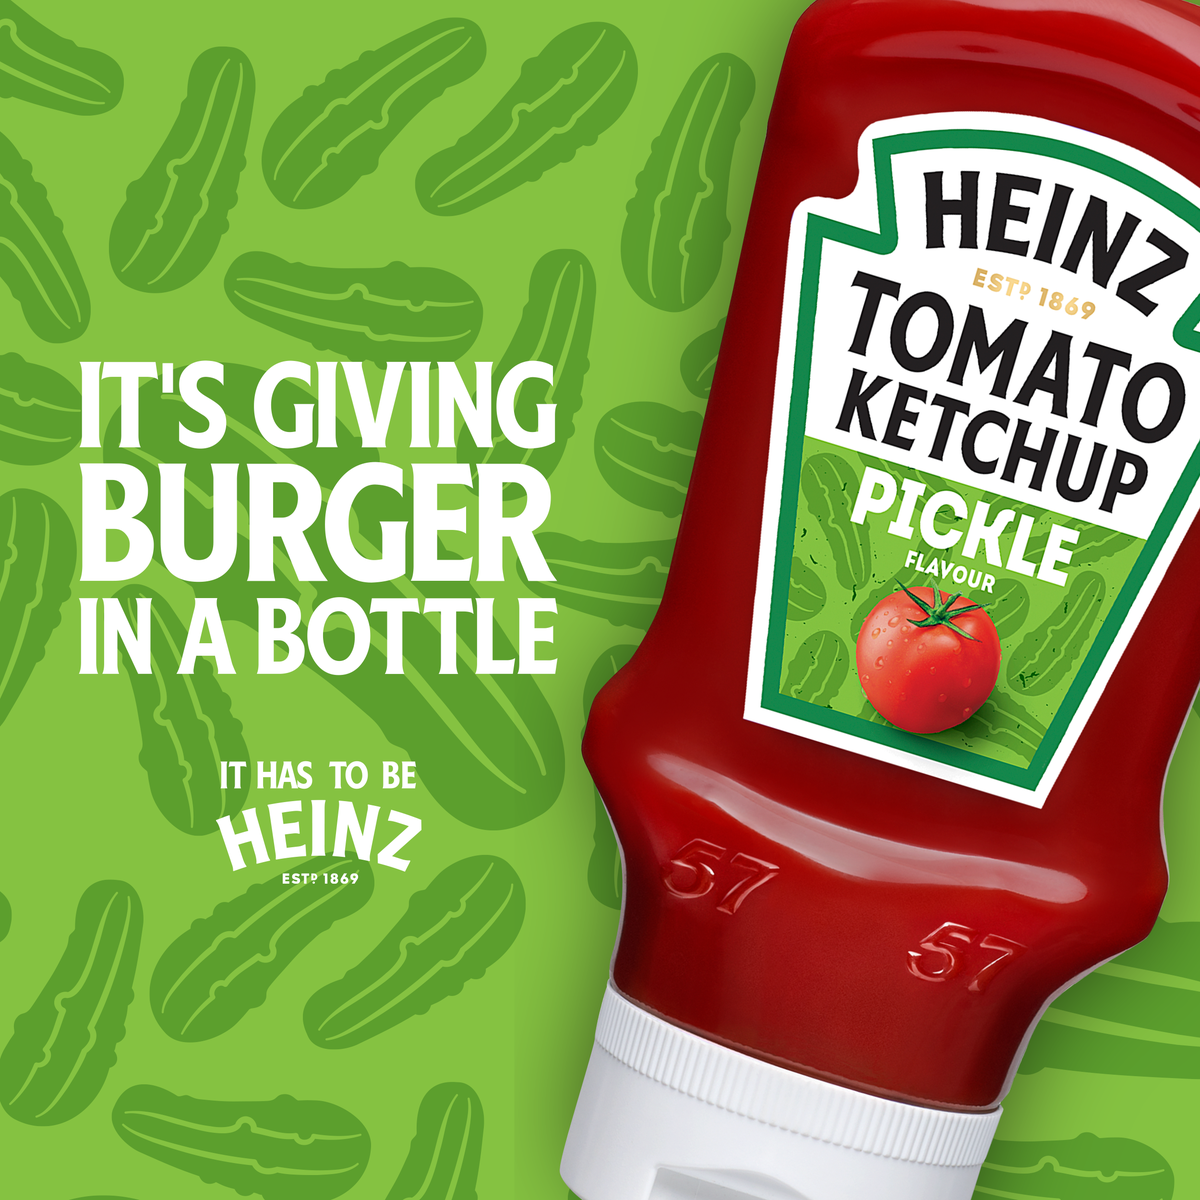 PICKLE YOUR TASTEBUDS WITH THE NEW TOMATO KETCHUP PICKLE FLAVOUR! Introducing a new pickle flavoured ketchup. It’s ketchup, but with big pickle energy.